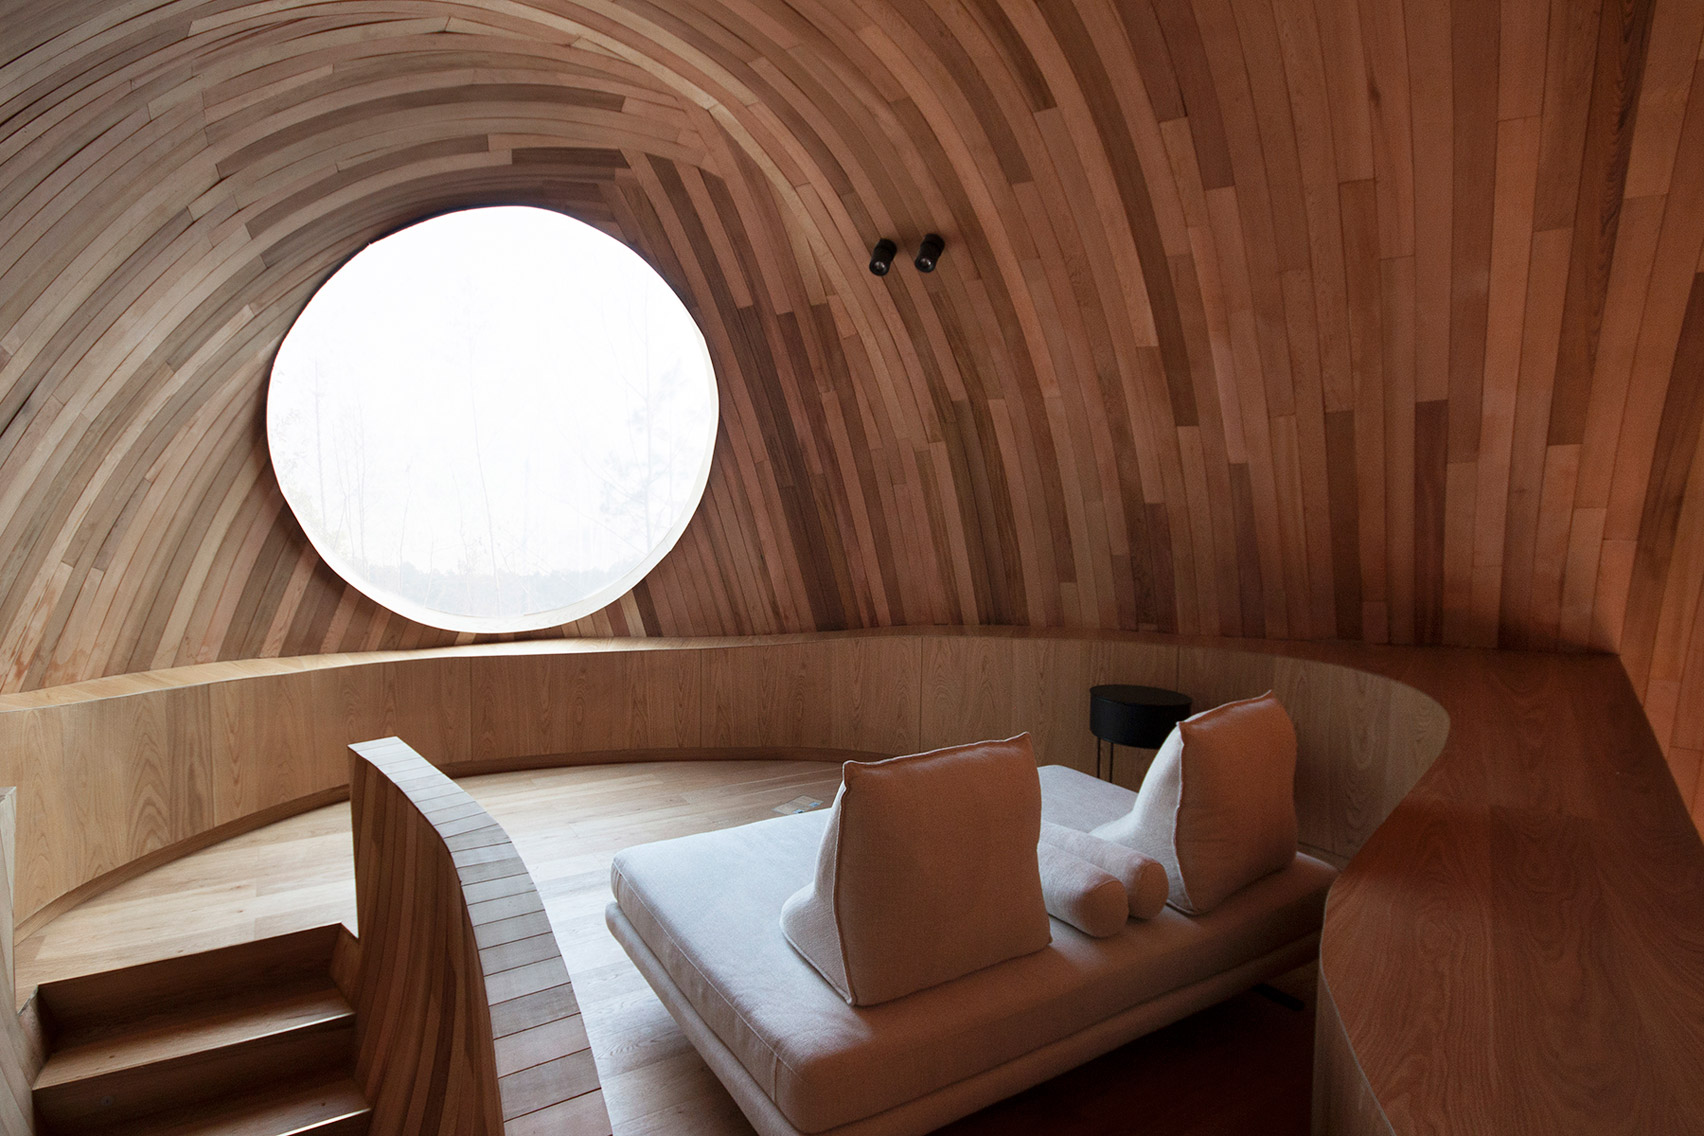 The interiors of a wooden cabin